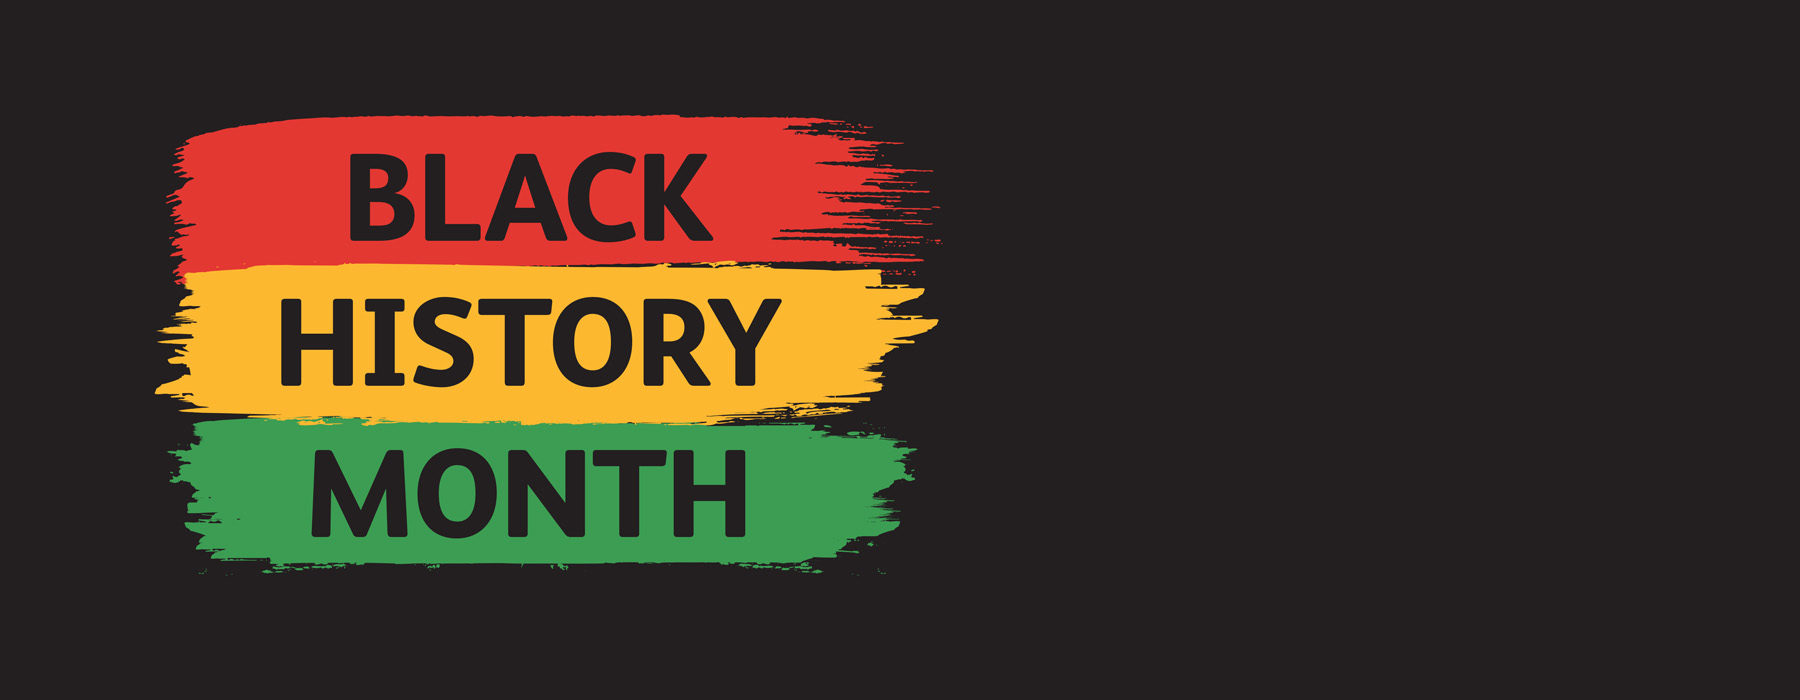 Graphic showing the words Black History Month on red, yellow and green painted stripes on a black background.